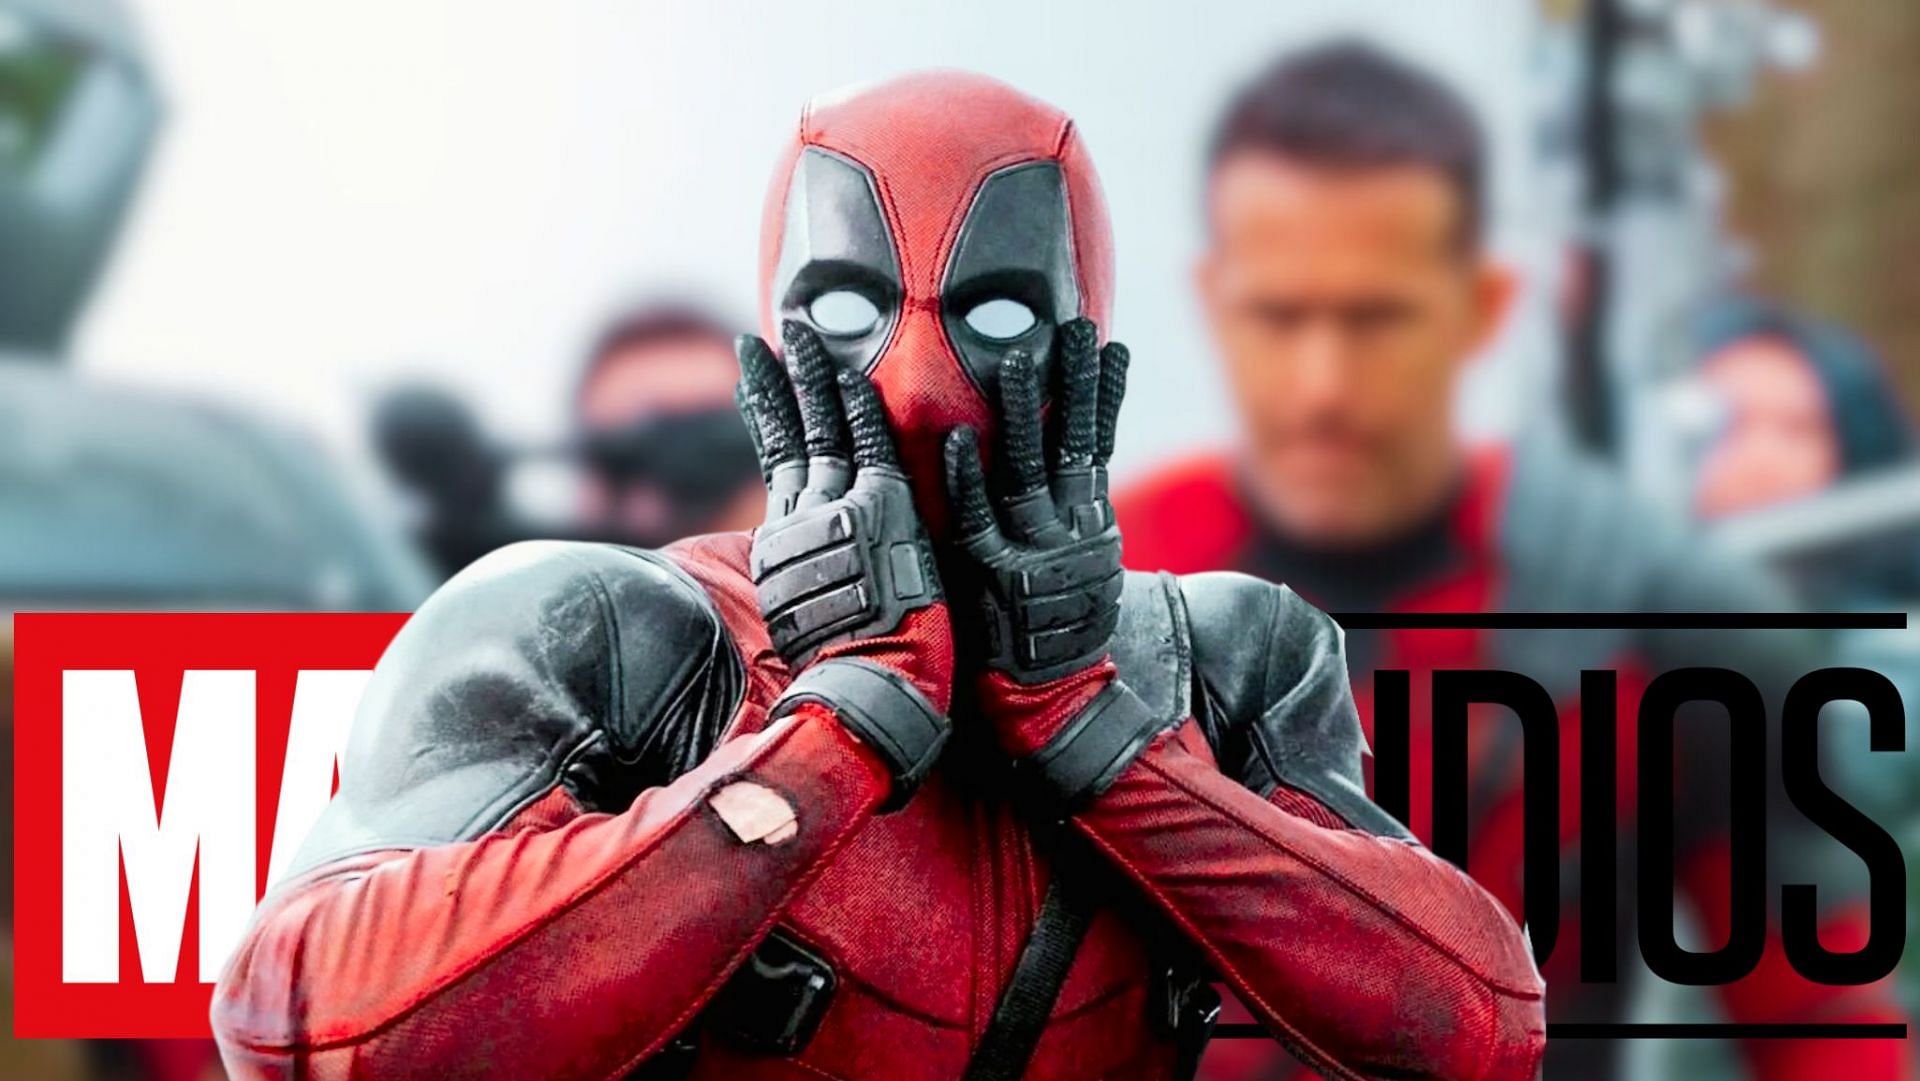 Prepare to be amazed! Leaked Deadpool 3 set images show Wade Wilson